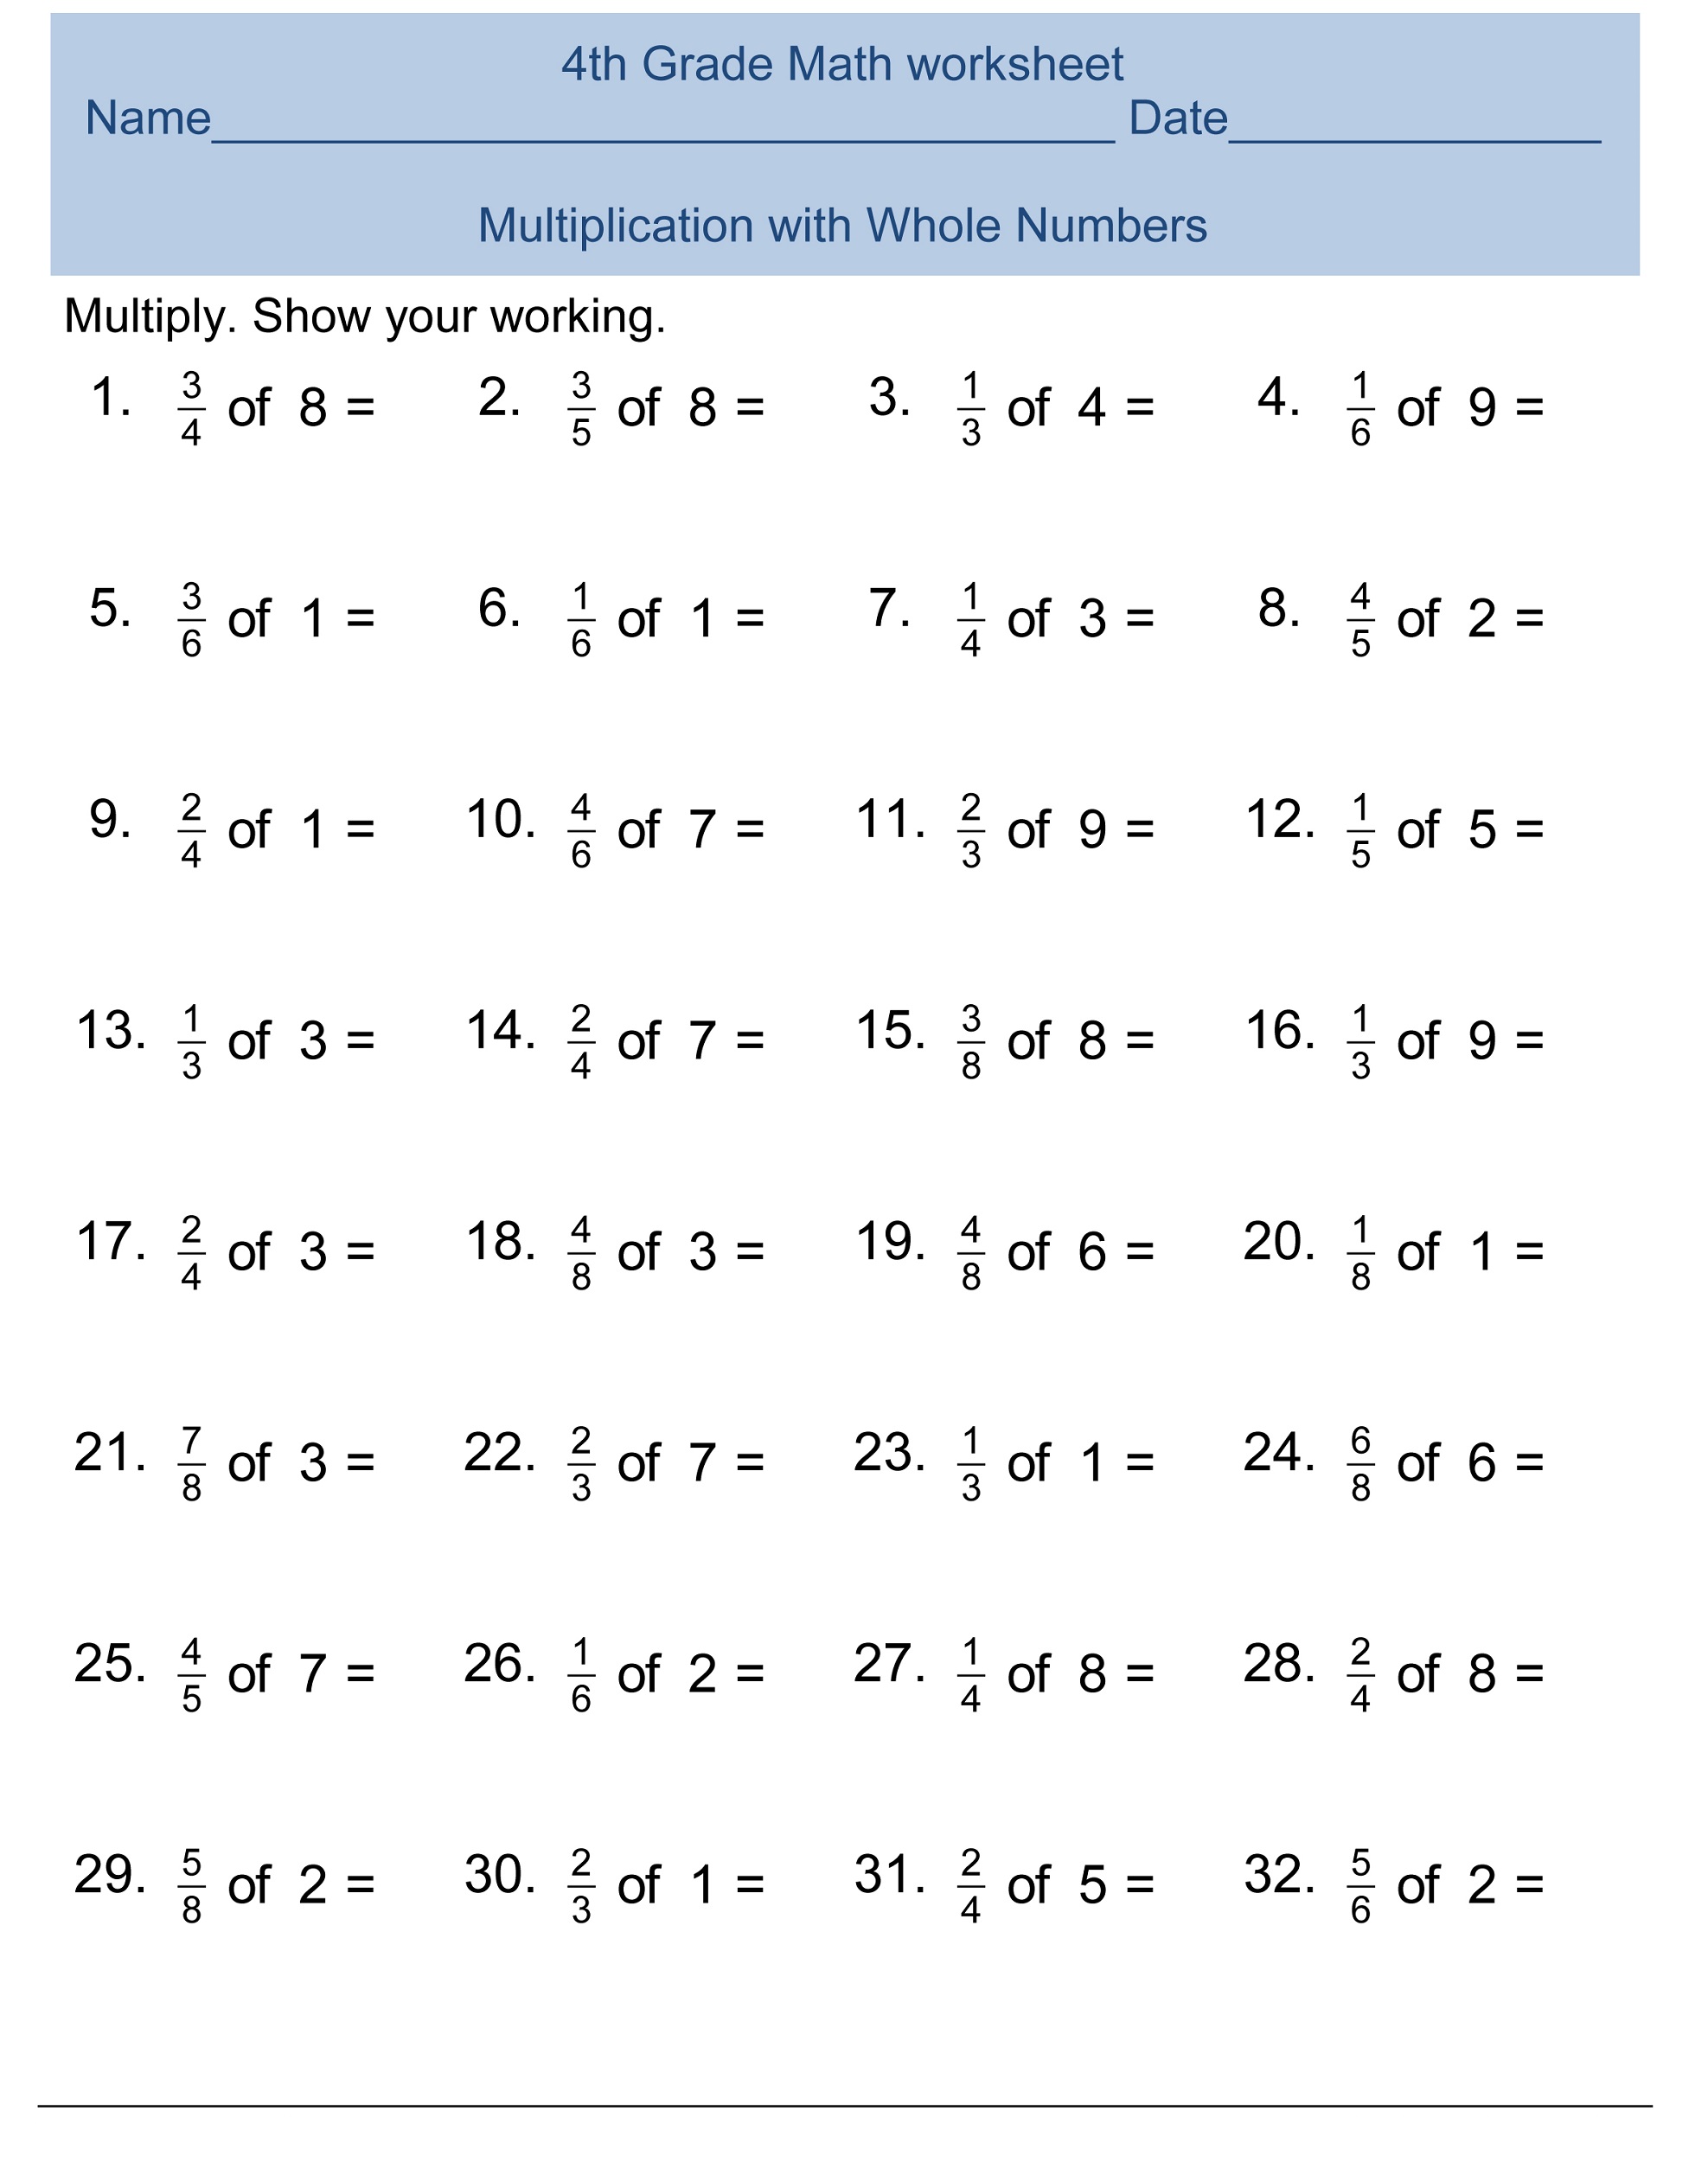 3-maths-worksheet-multiplying-and-dividing-by-10-and-100-free-4th-grade-math-worksheets